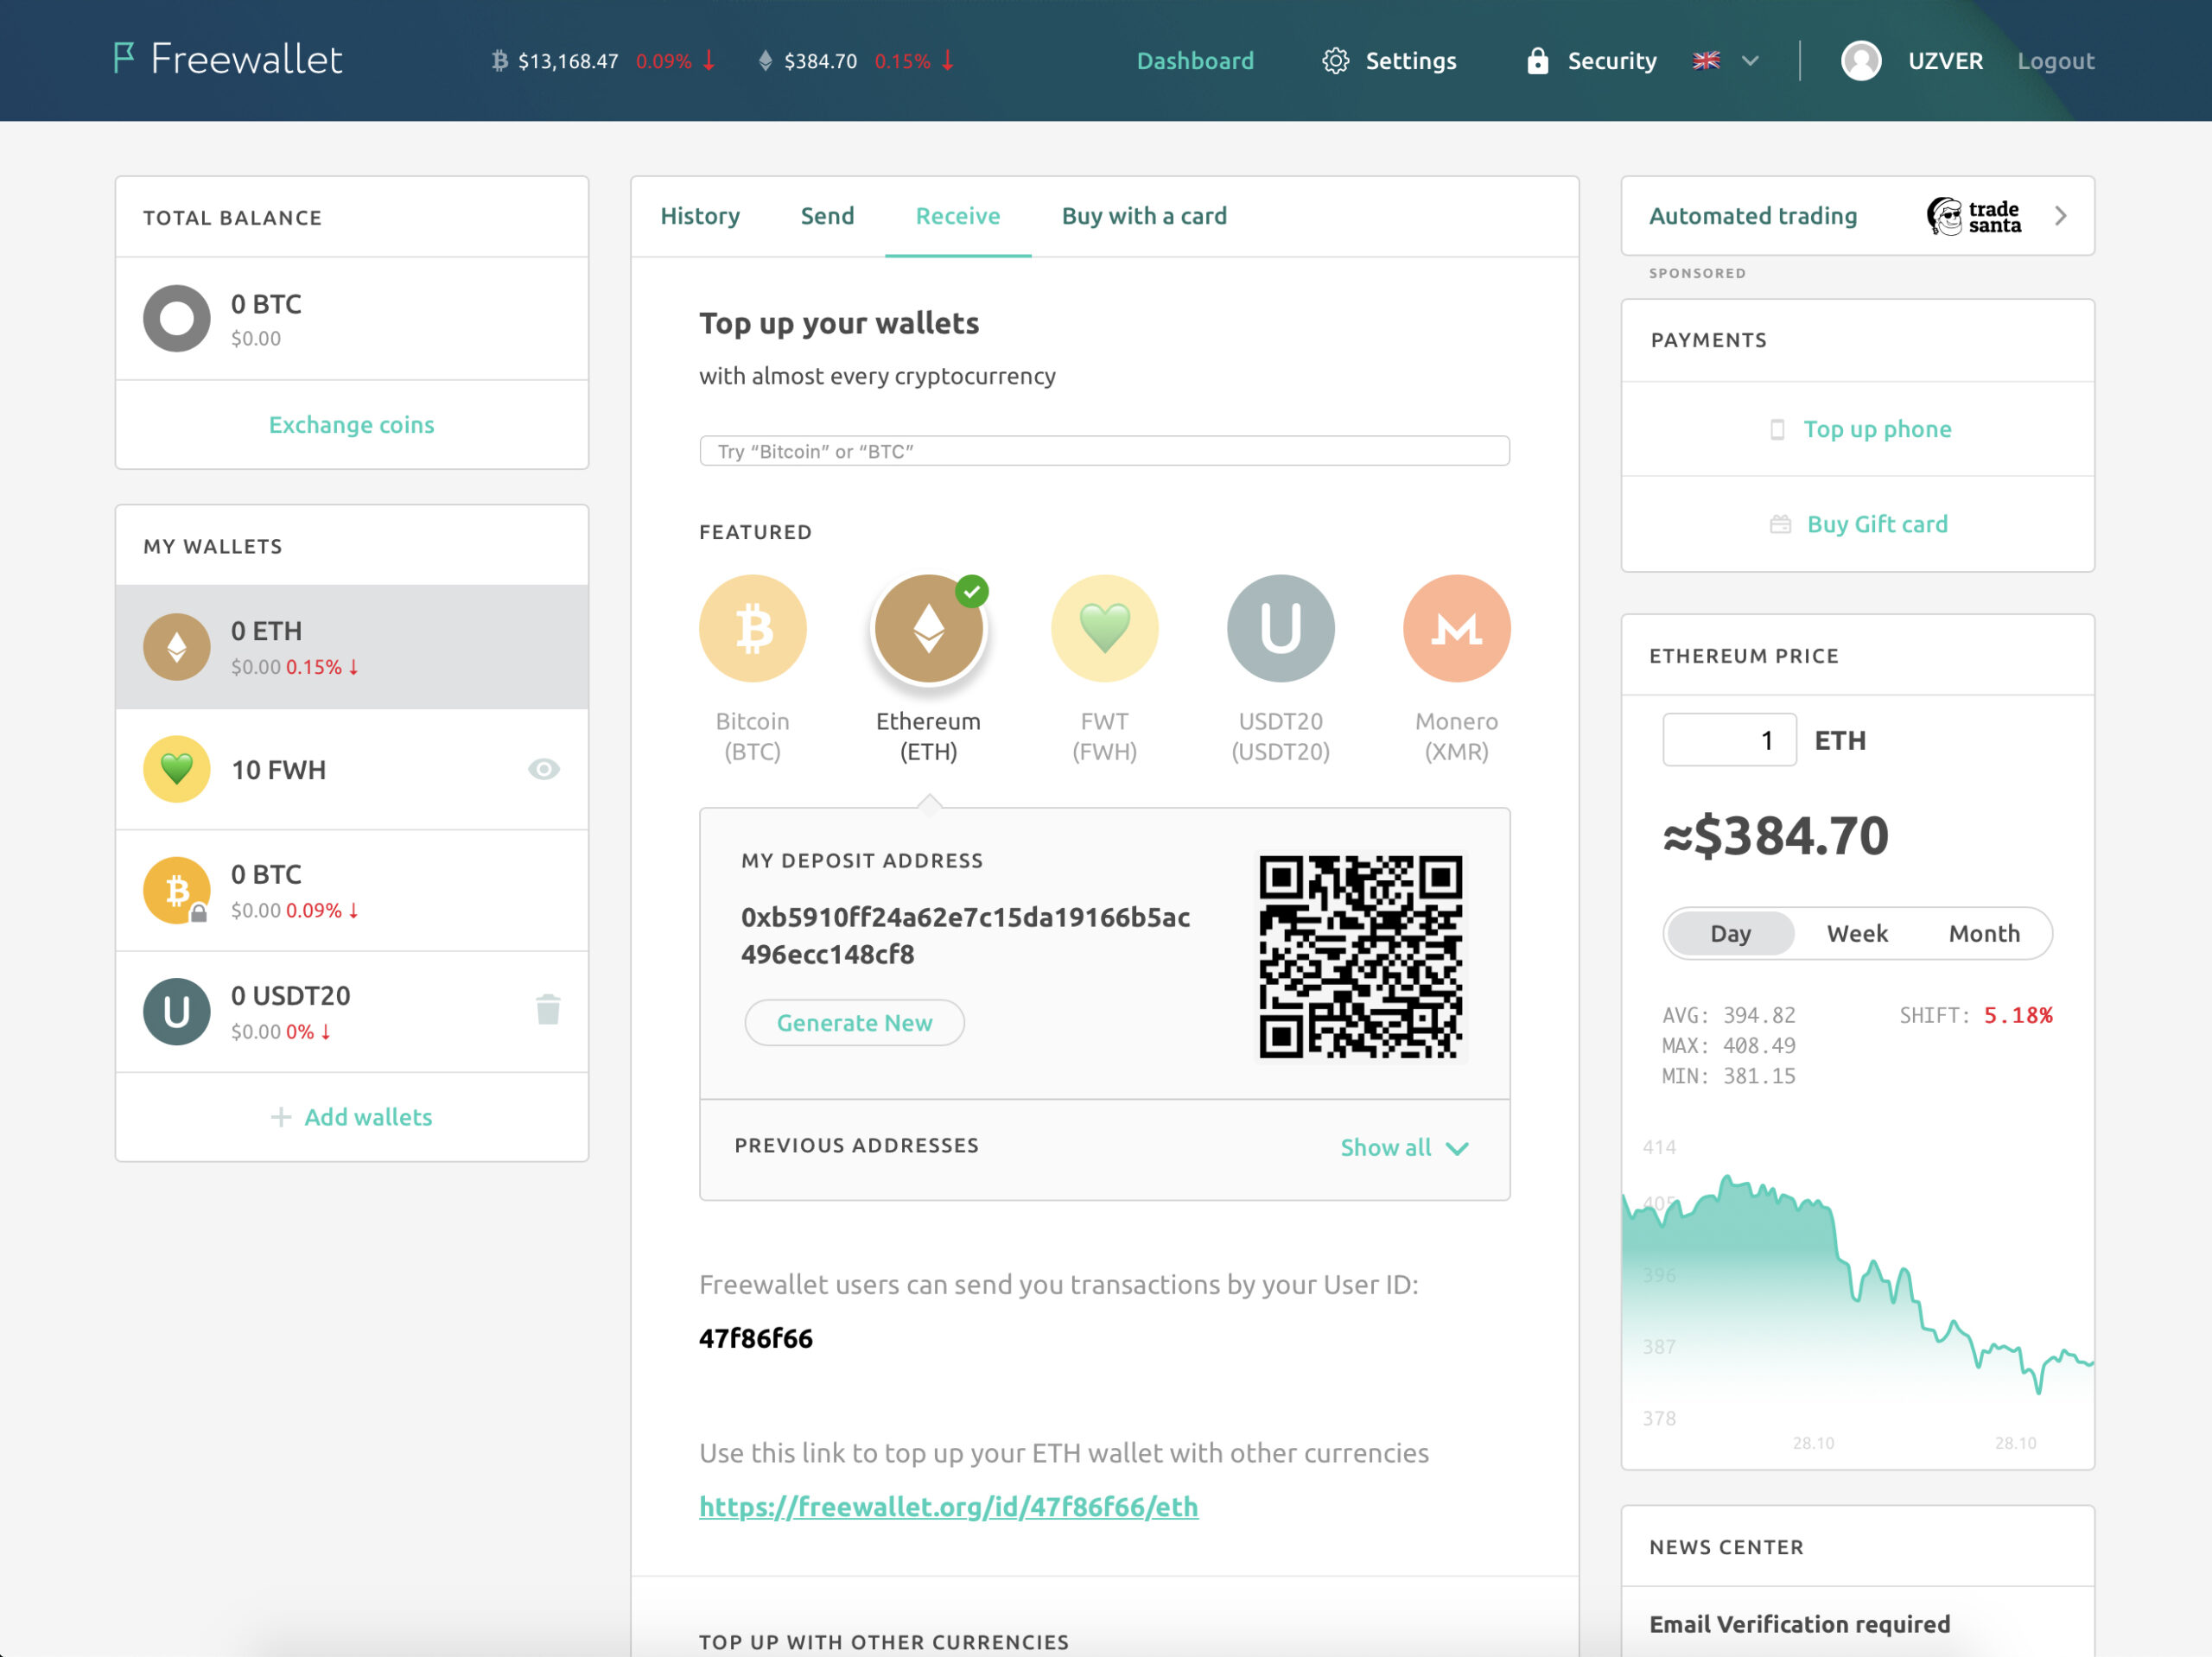 ethereum wallet by freewallet review